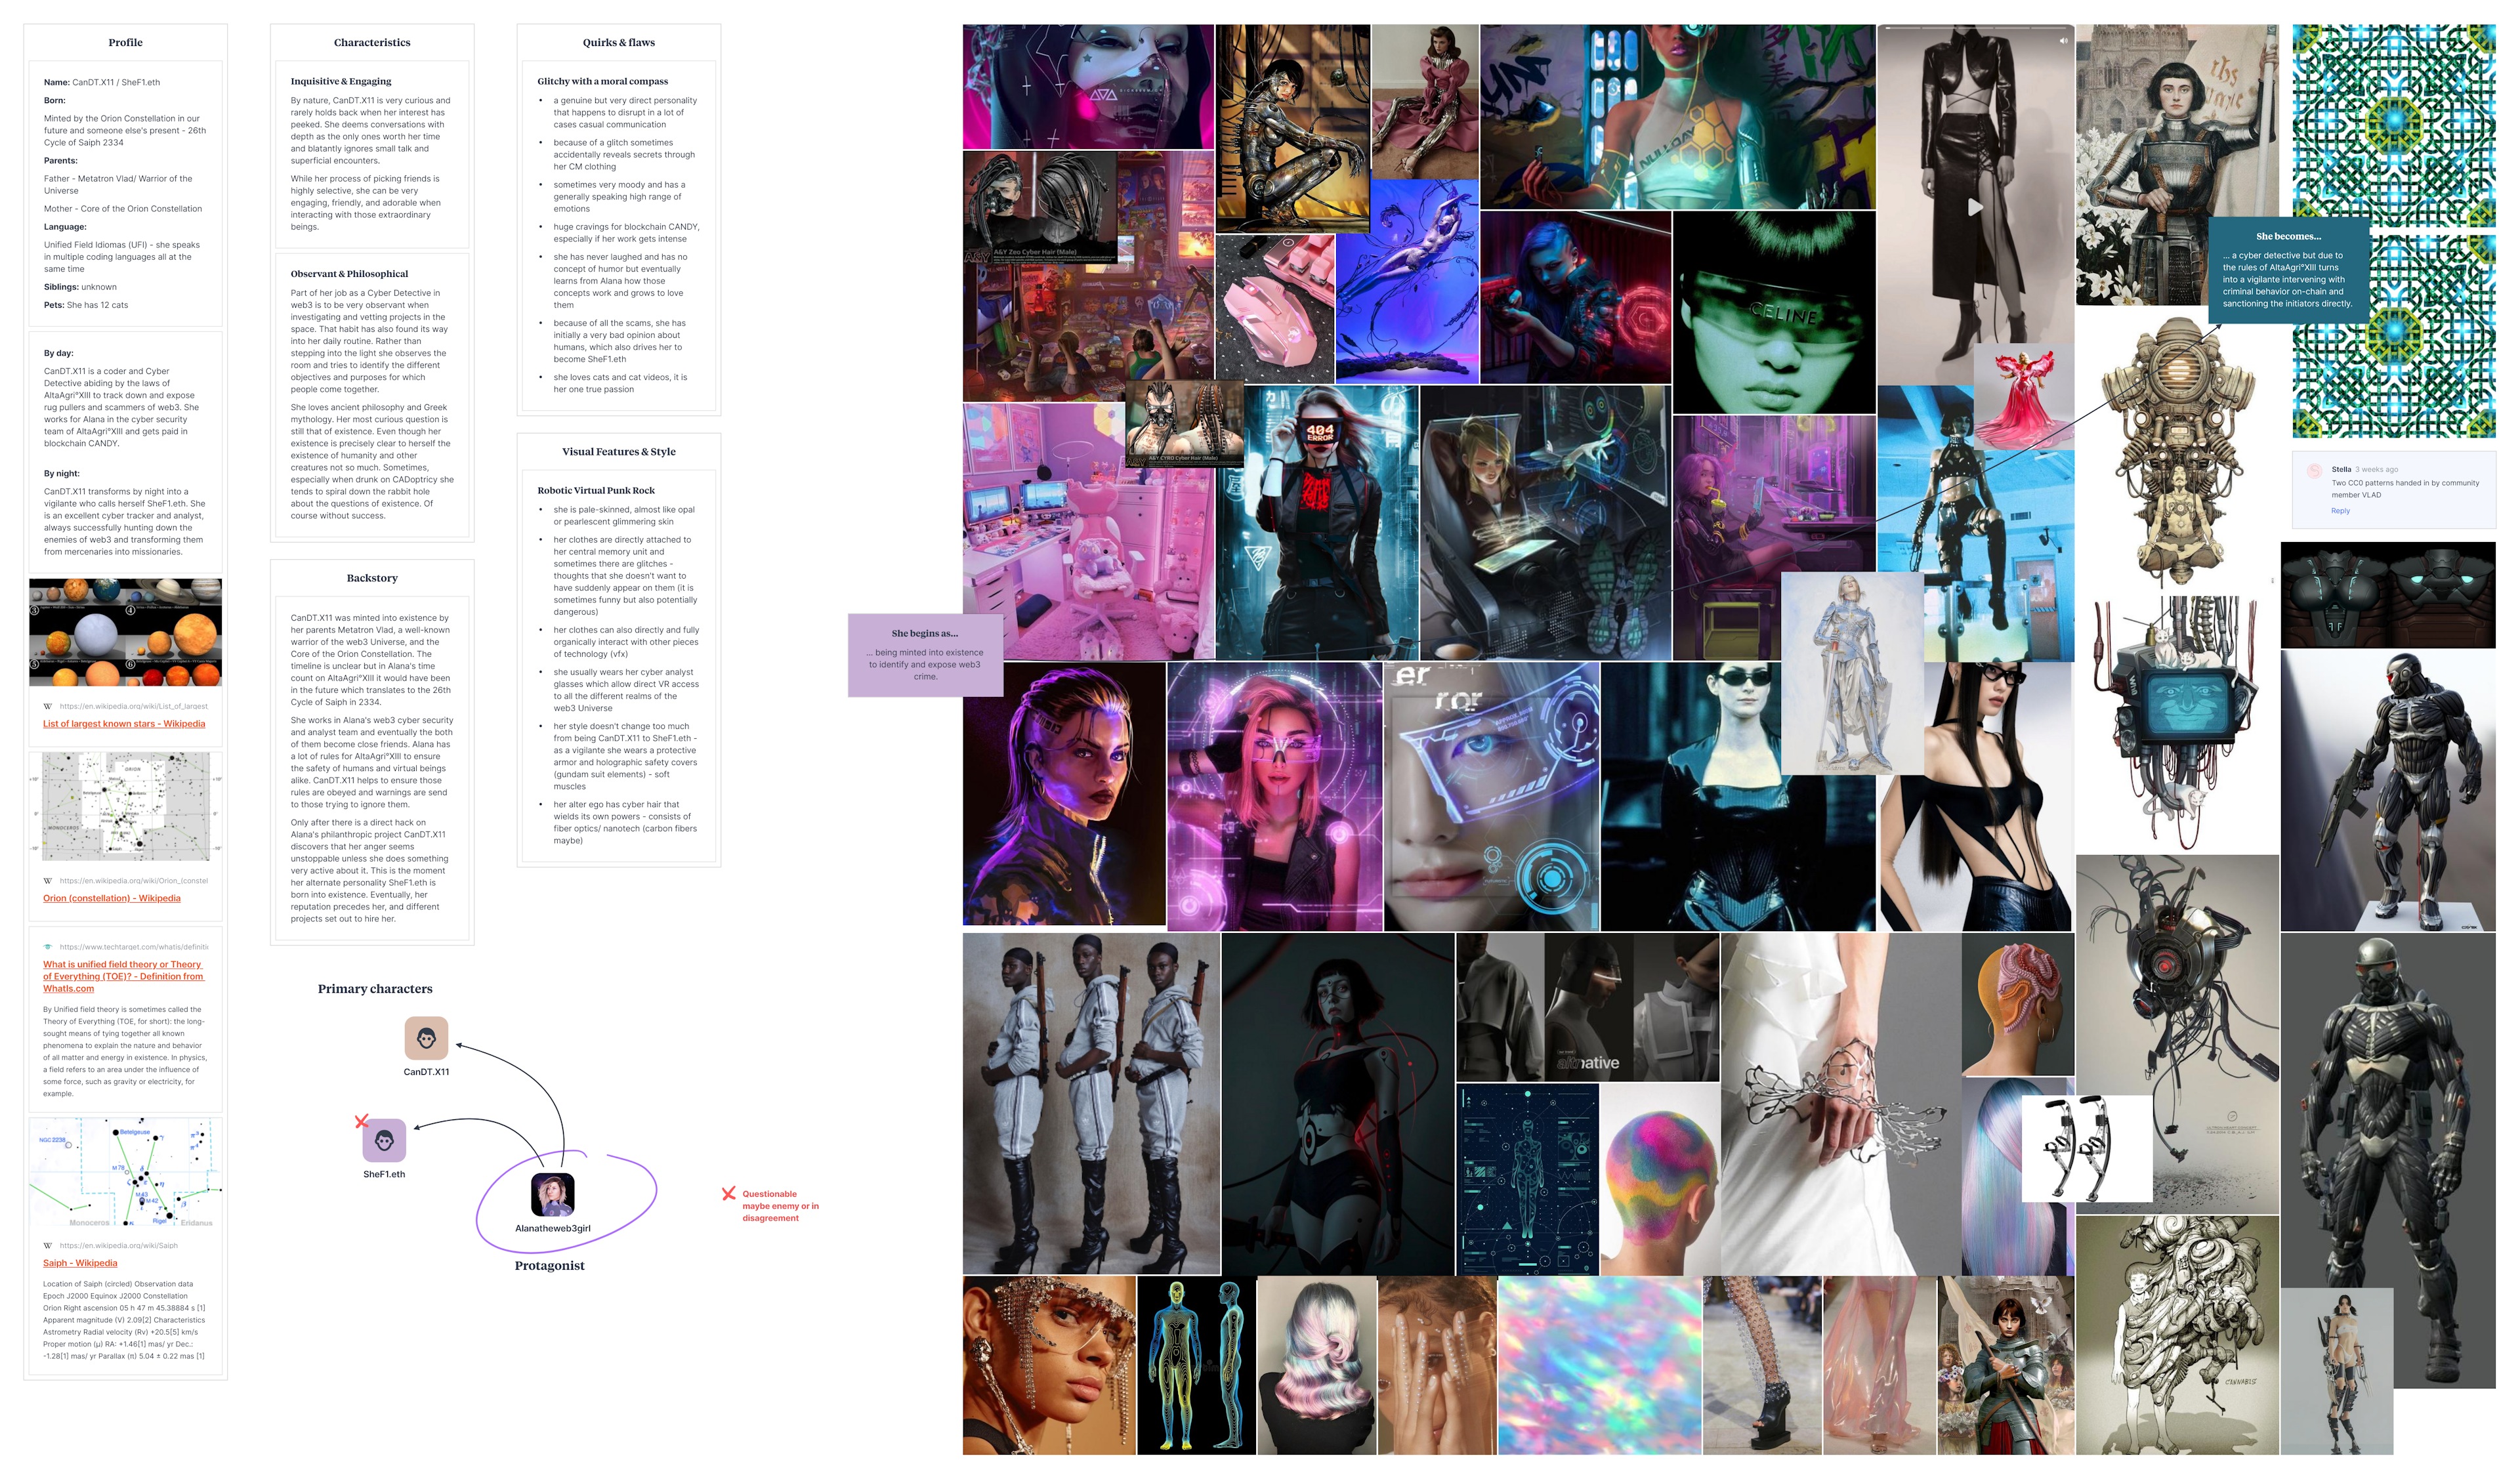 Exported mood board for visualization purposes.